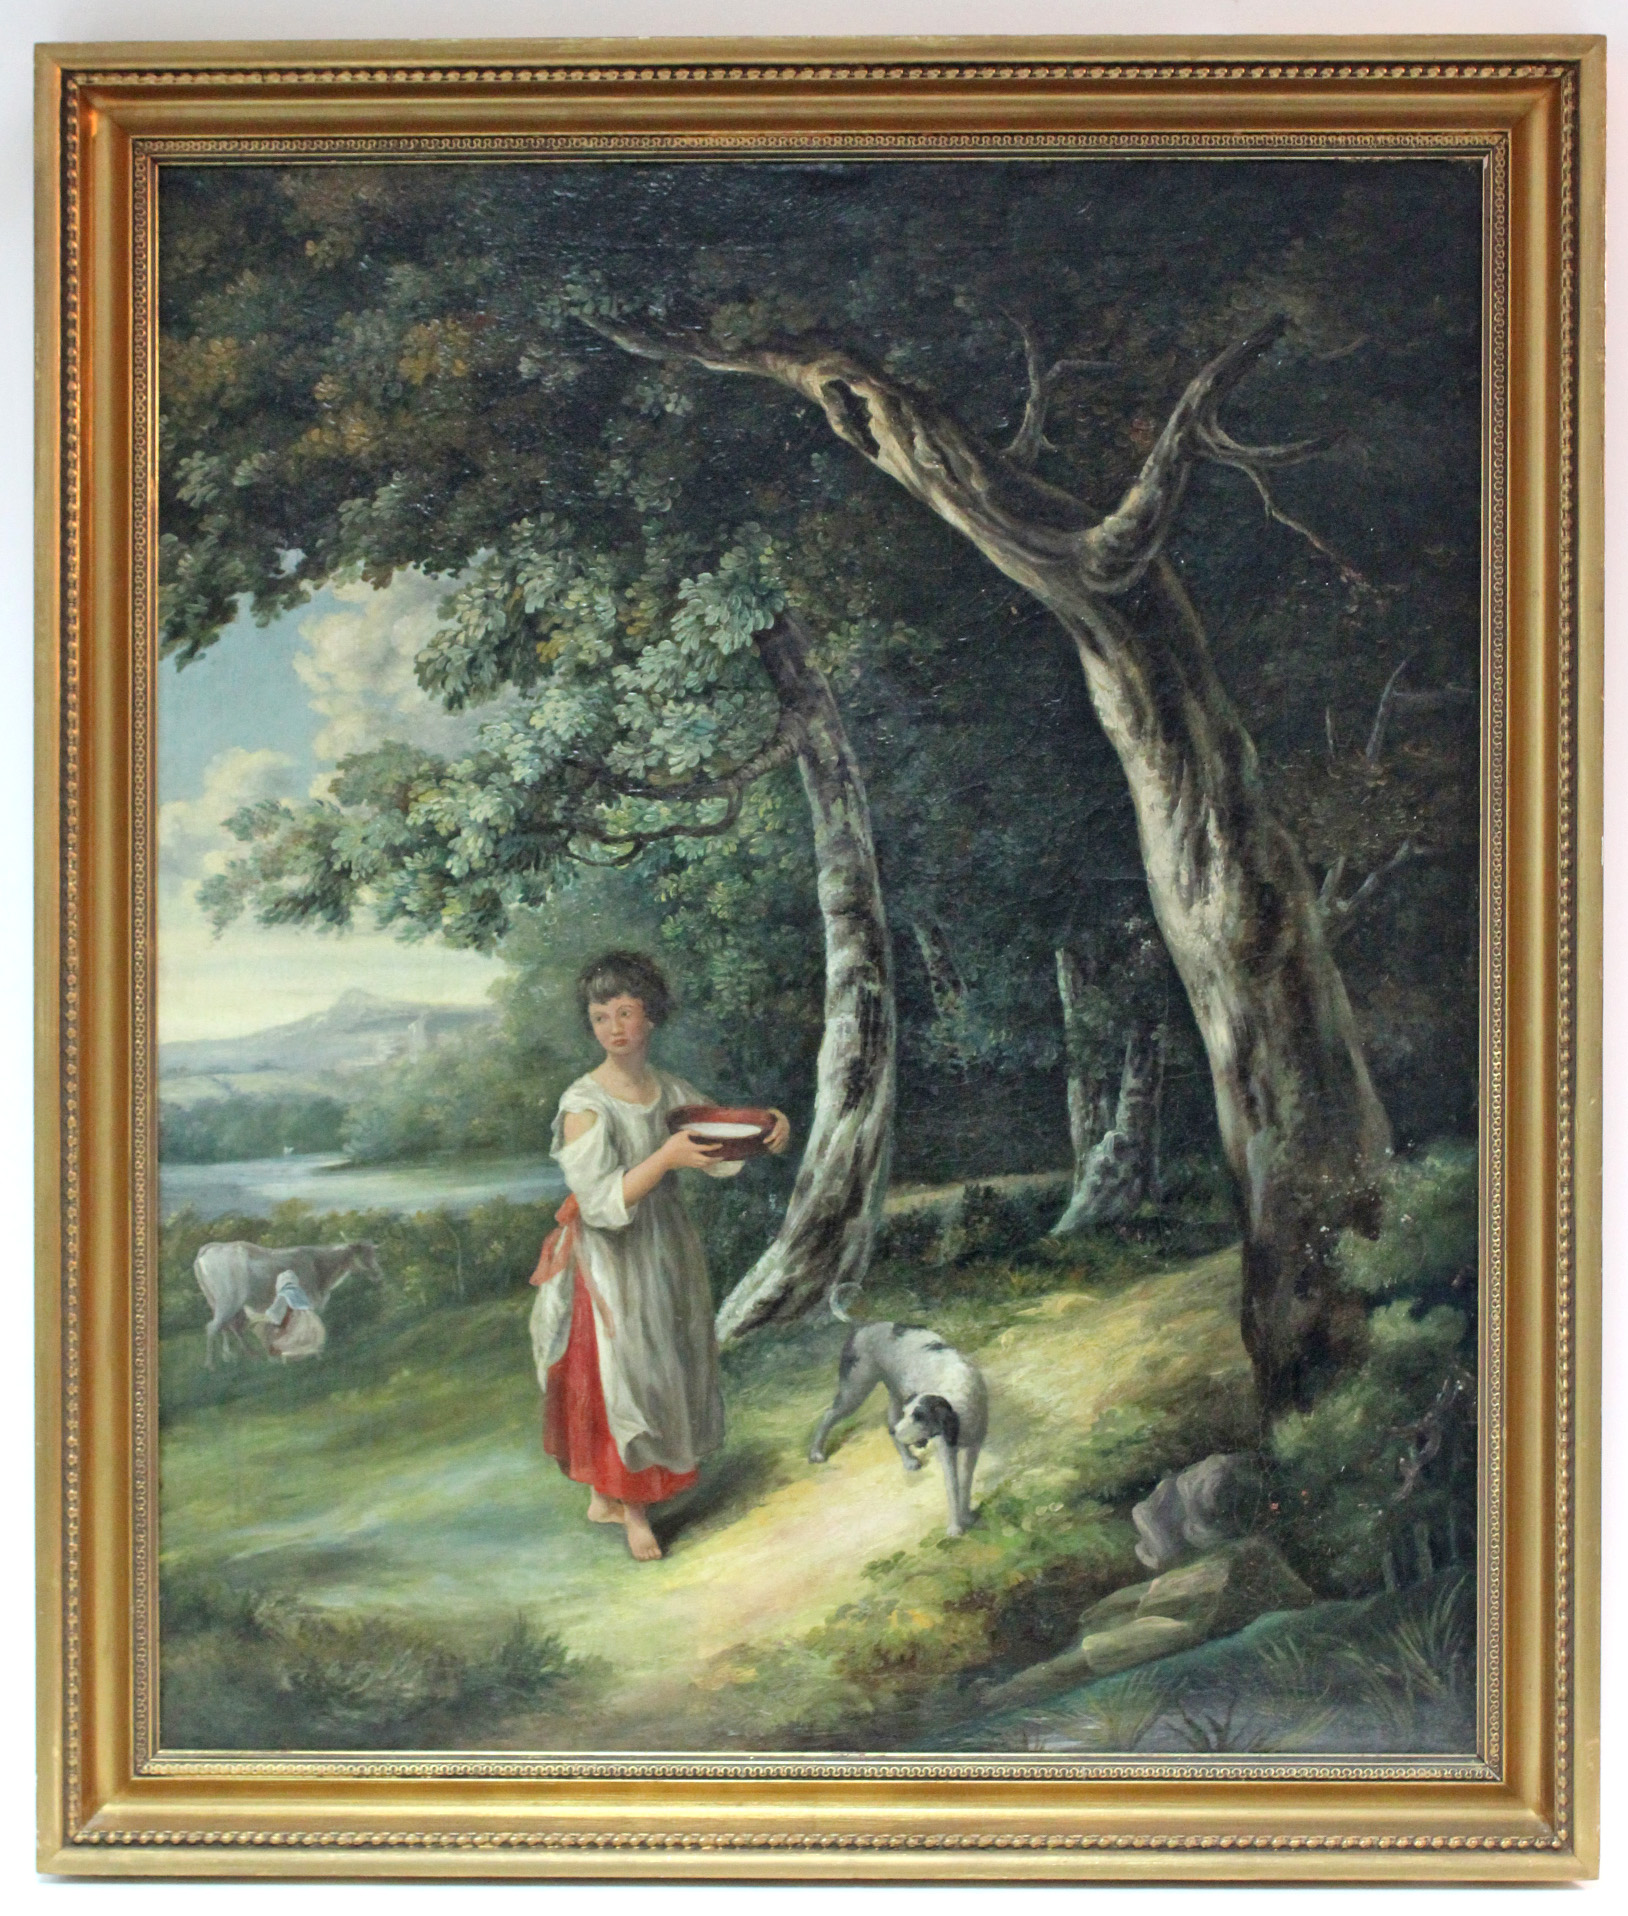 ENGLISH SCHOOL, late 18th/early 19th century. A wooded landscape with peasant girl holding a pan - Image 2 of 4